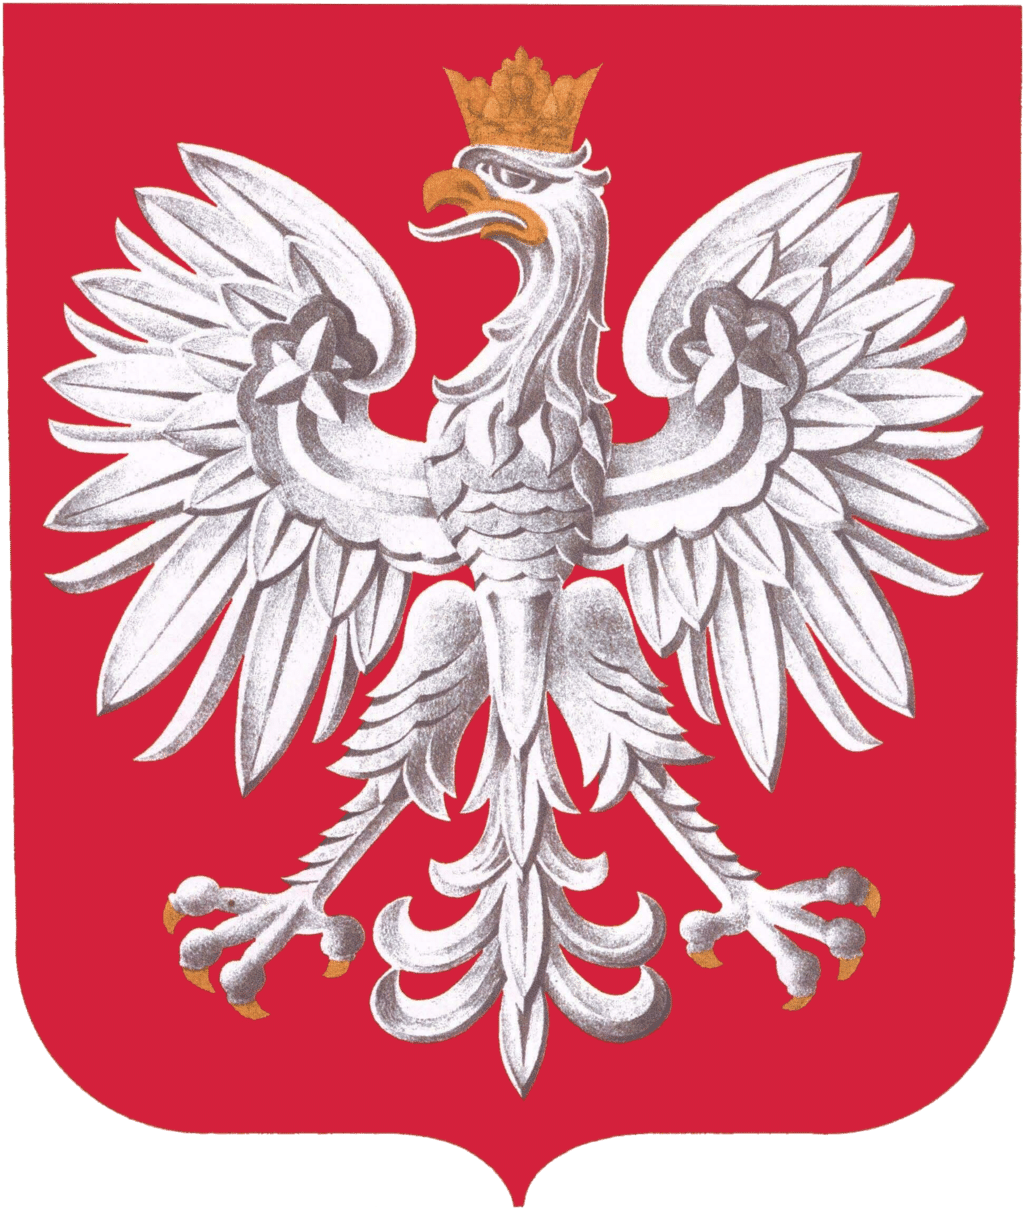 Coat of arms of Poland; a white eagle on a red background.